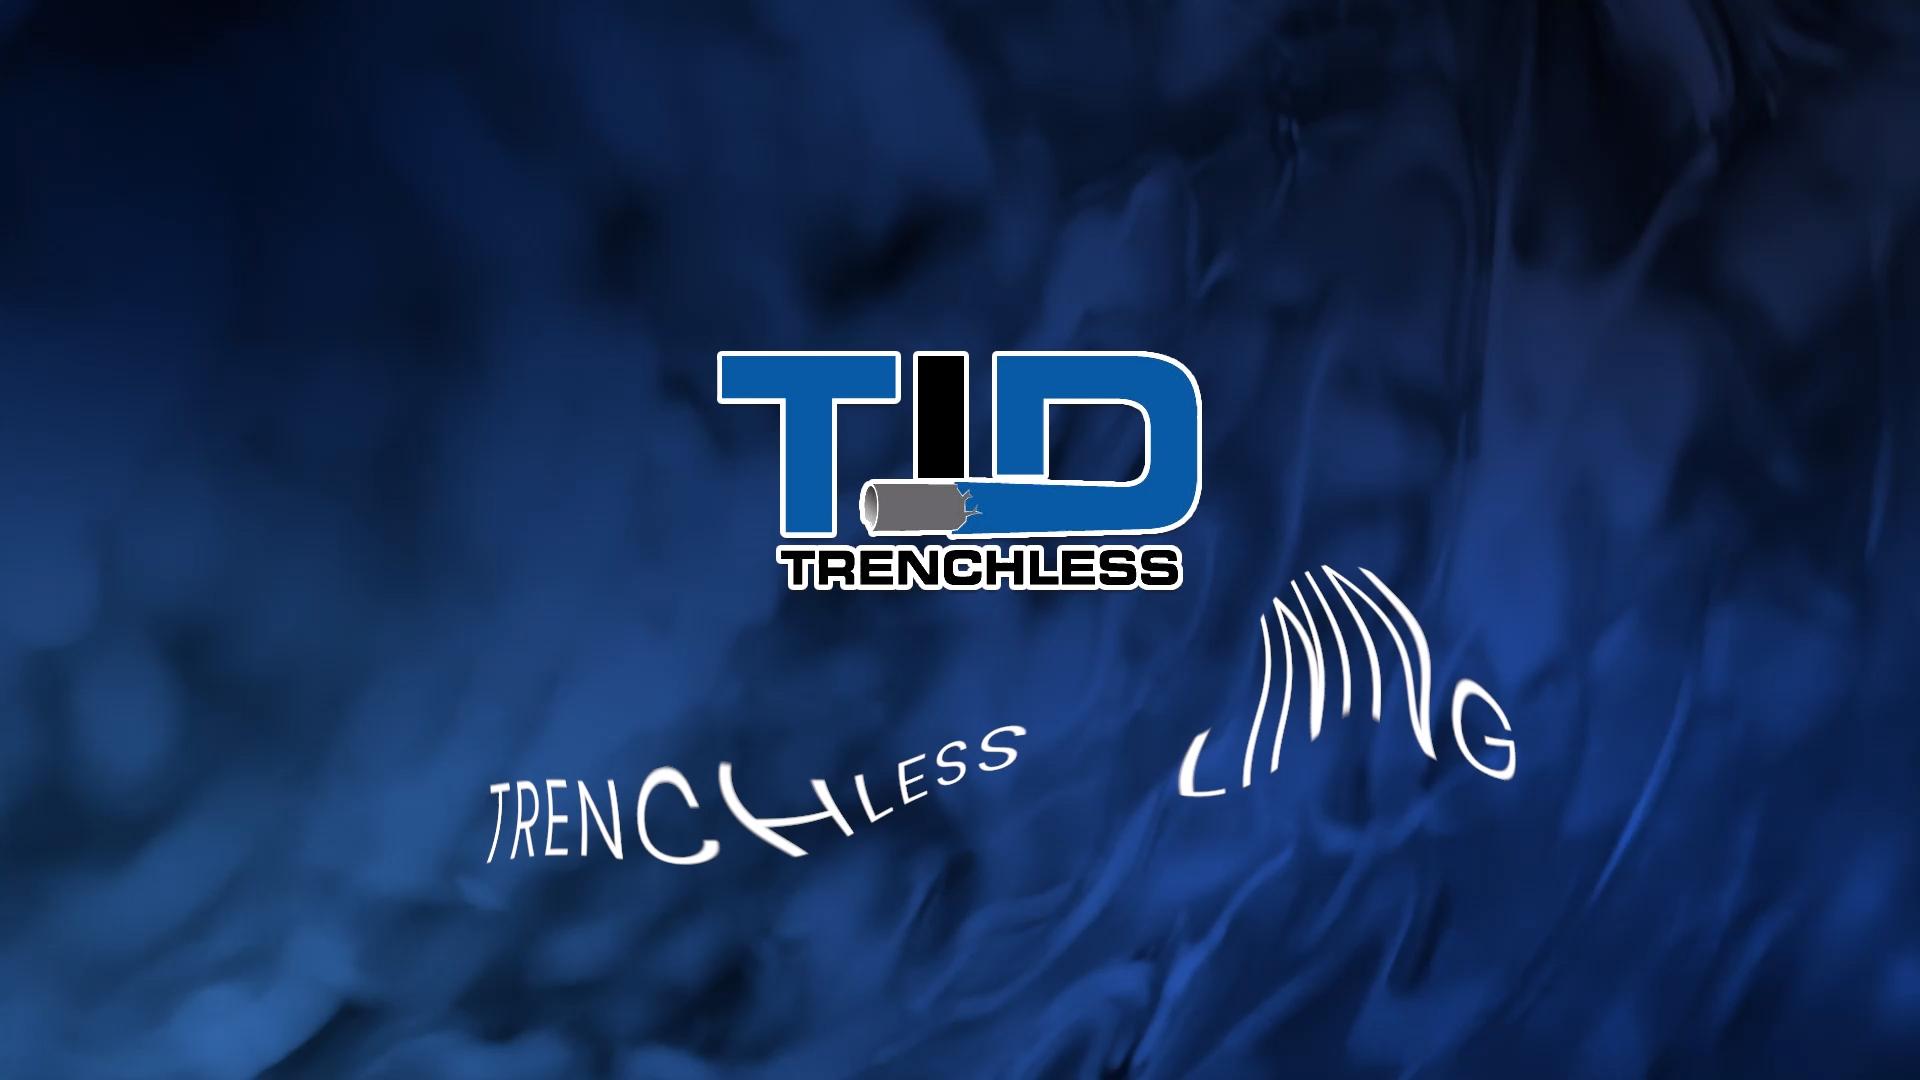 tid trenchless